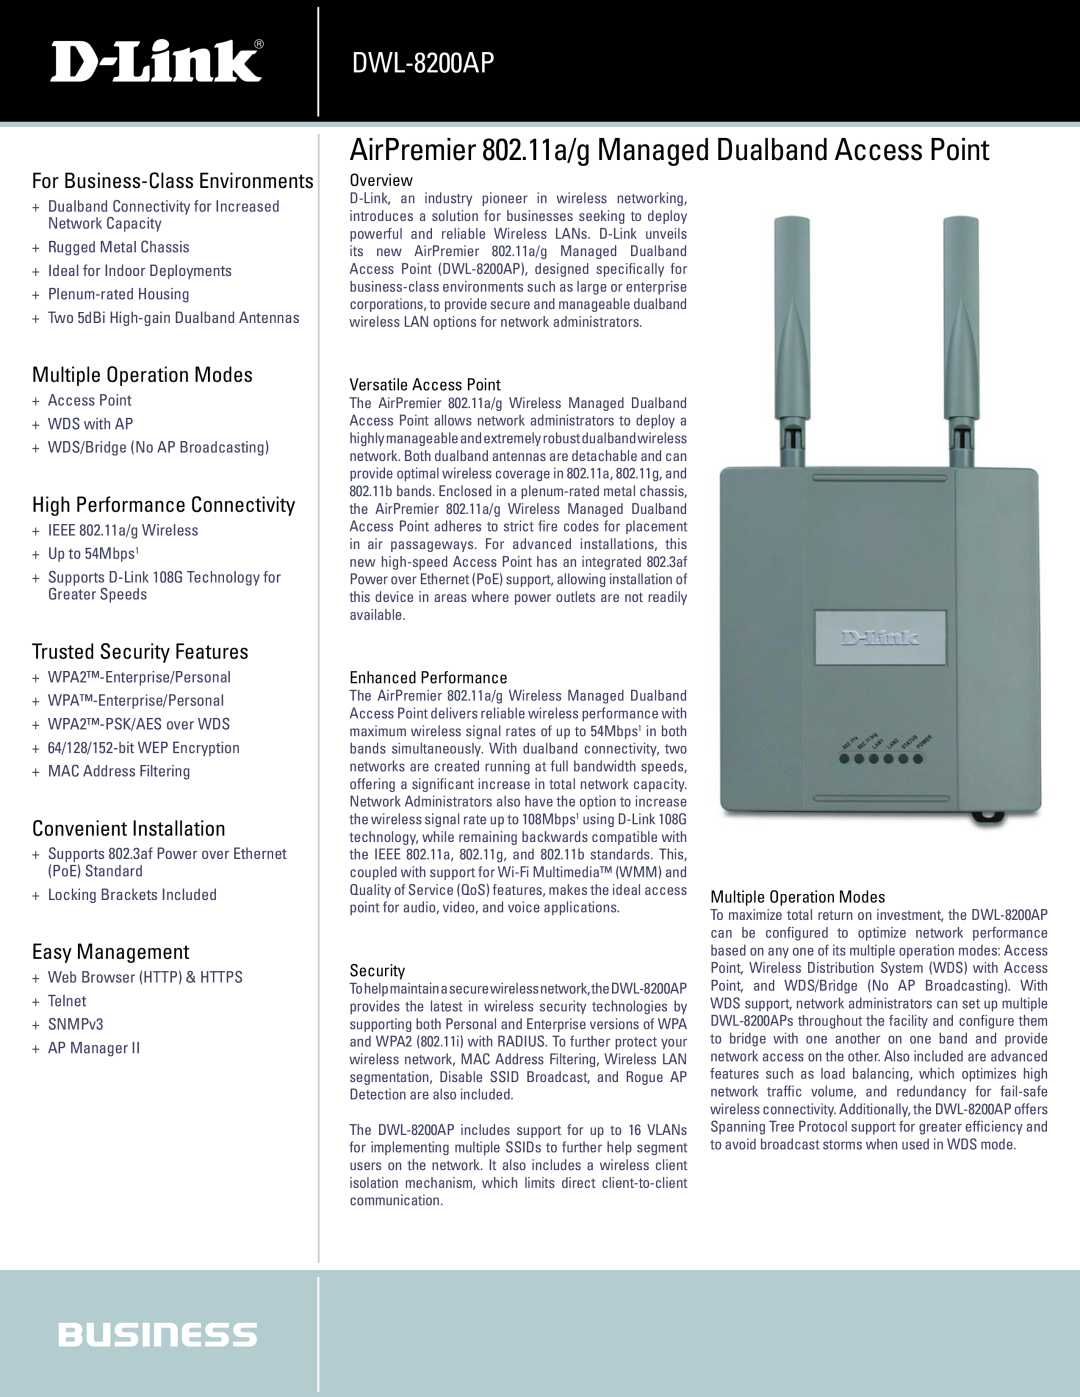 D-Link DWL-8200AP manual AirPremier 802.11a/g Managed Dualband Access Point, For Business-Class Environments, Overview 